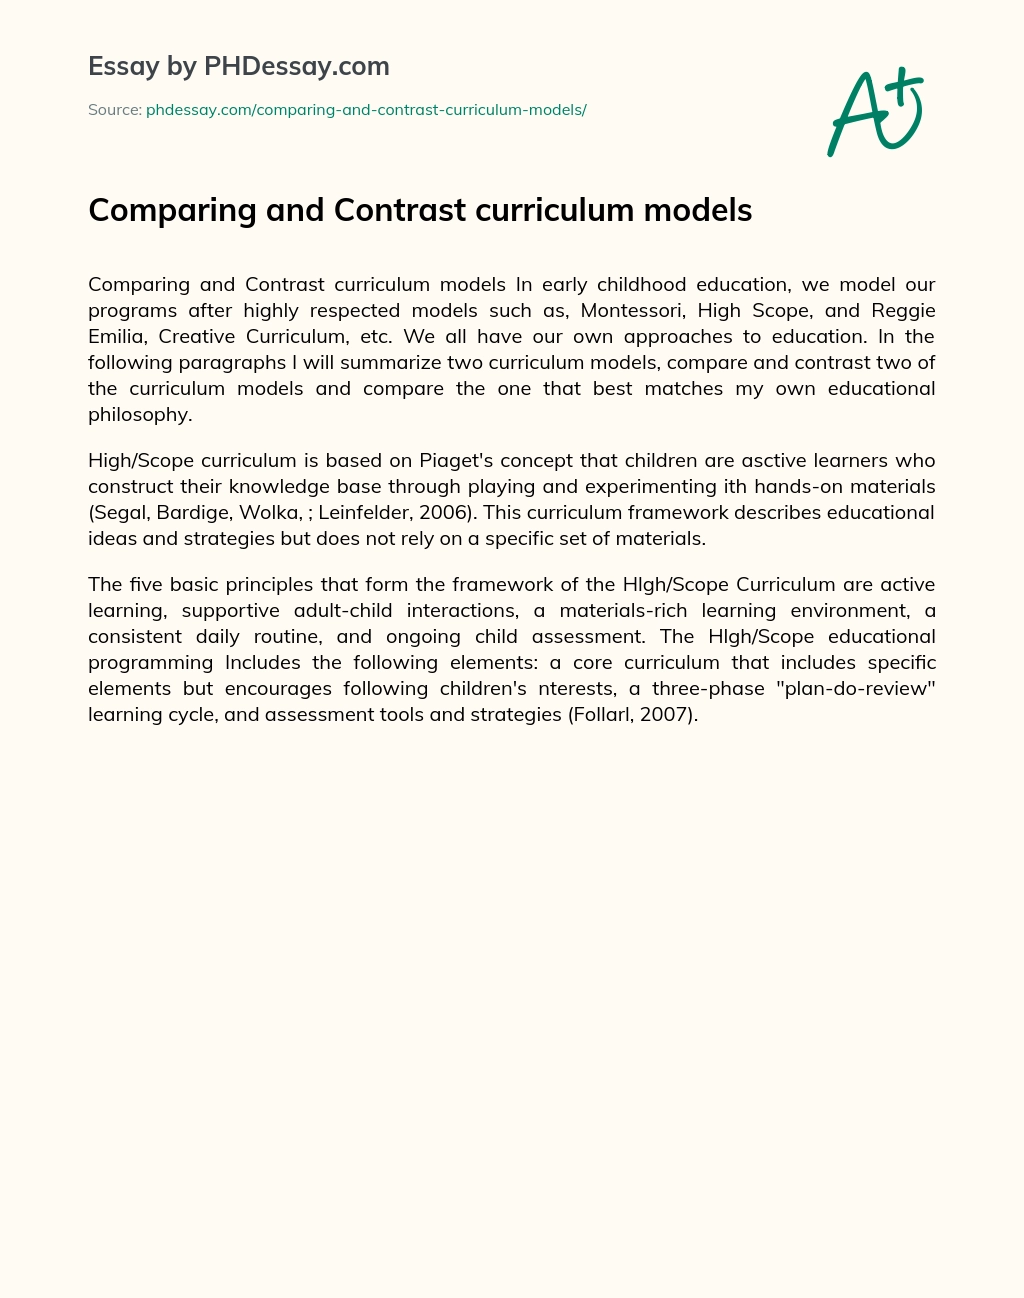 Comparing and Contrast curriculum models essay